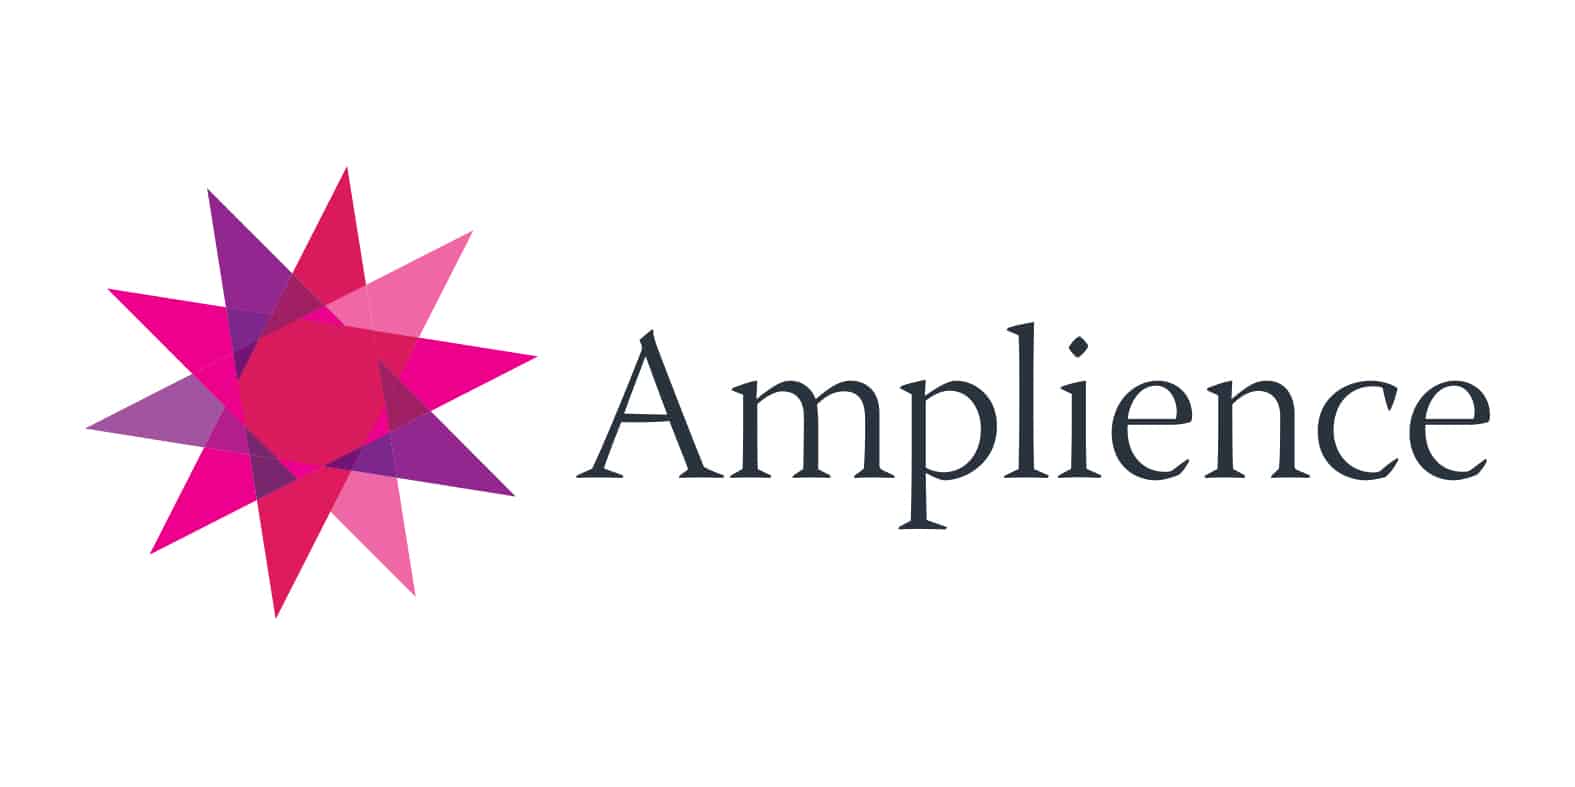 Amplience names new CEO